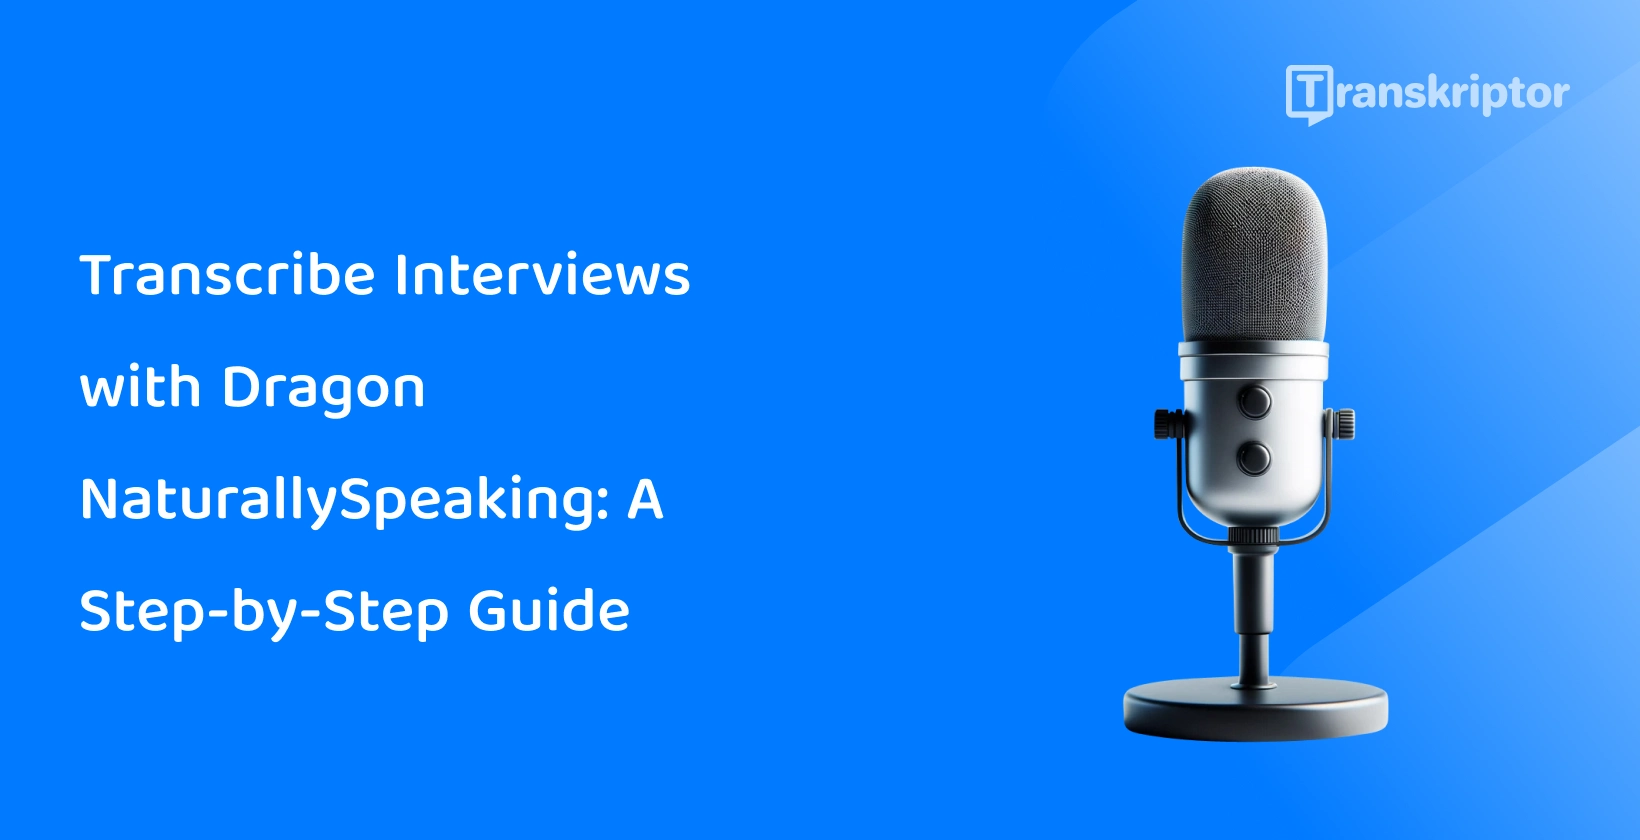 Microphone representing Dragon NaturallySpeaking's role in transcribing interviews, with a focus on a guided approach.